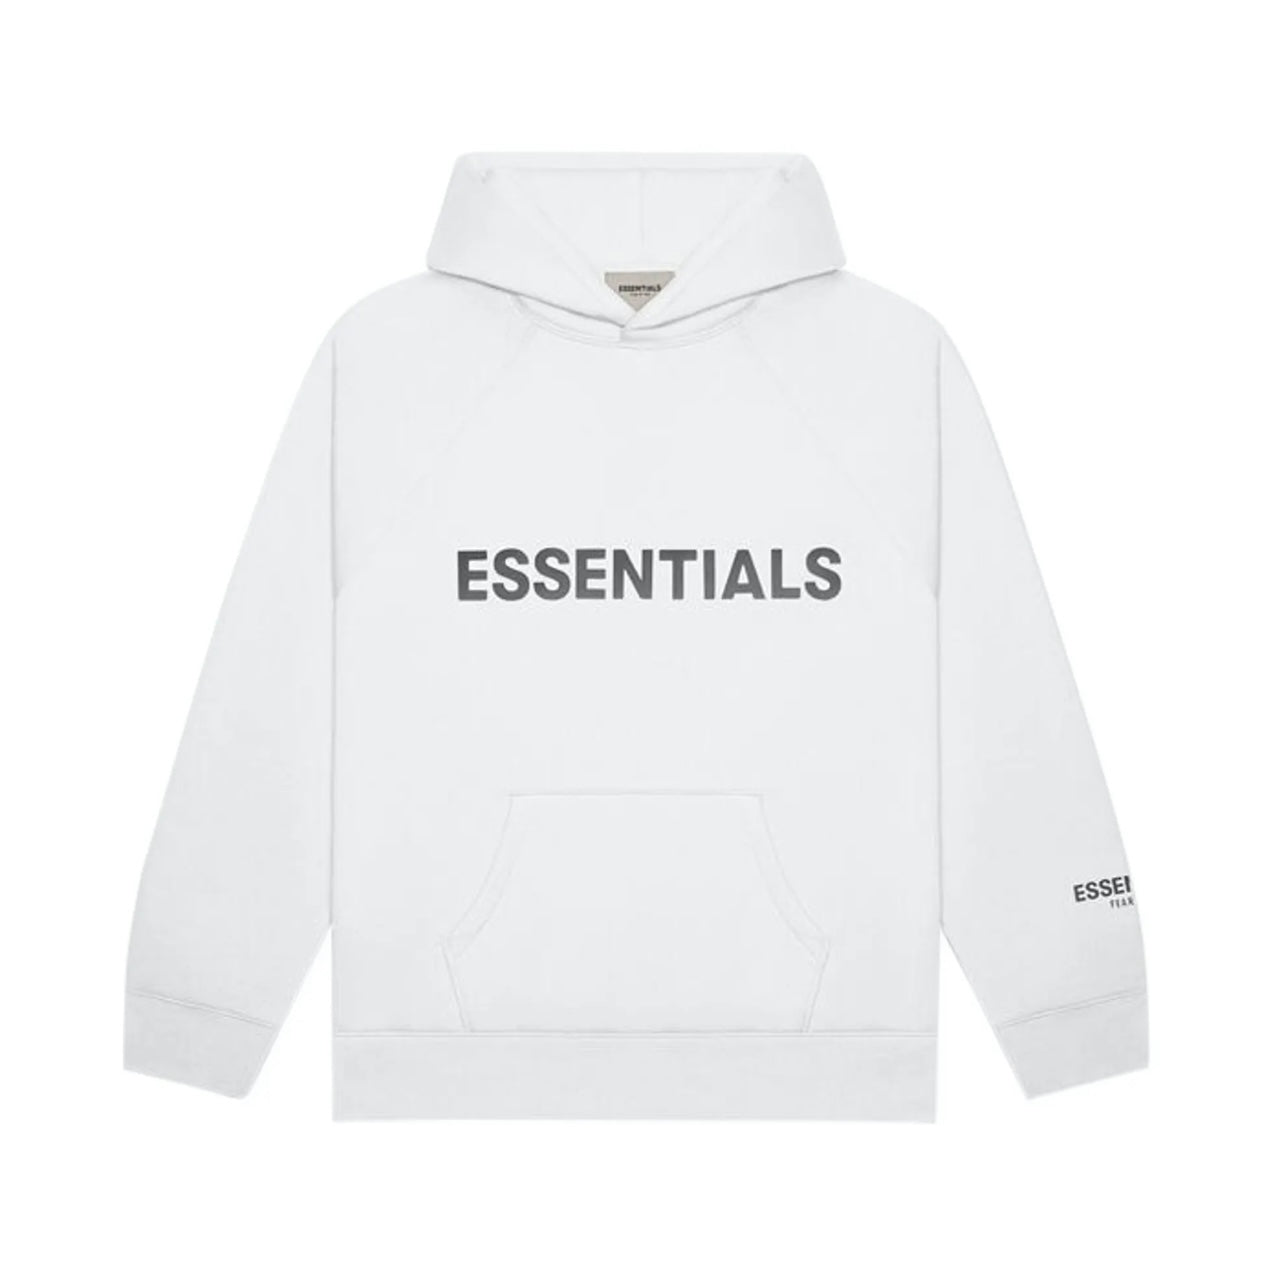 FEAR OF GOD ESSENTIALS PULLOVER HOODIE - WHITE